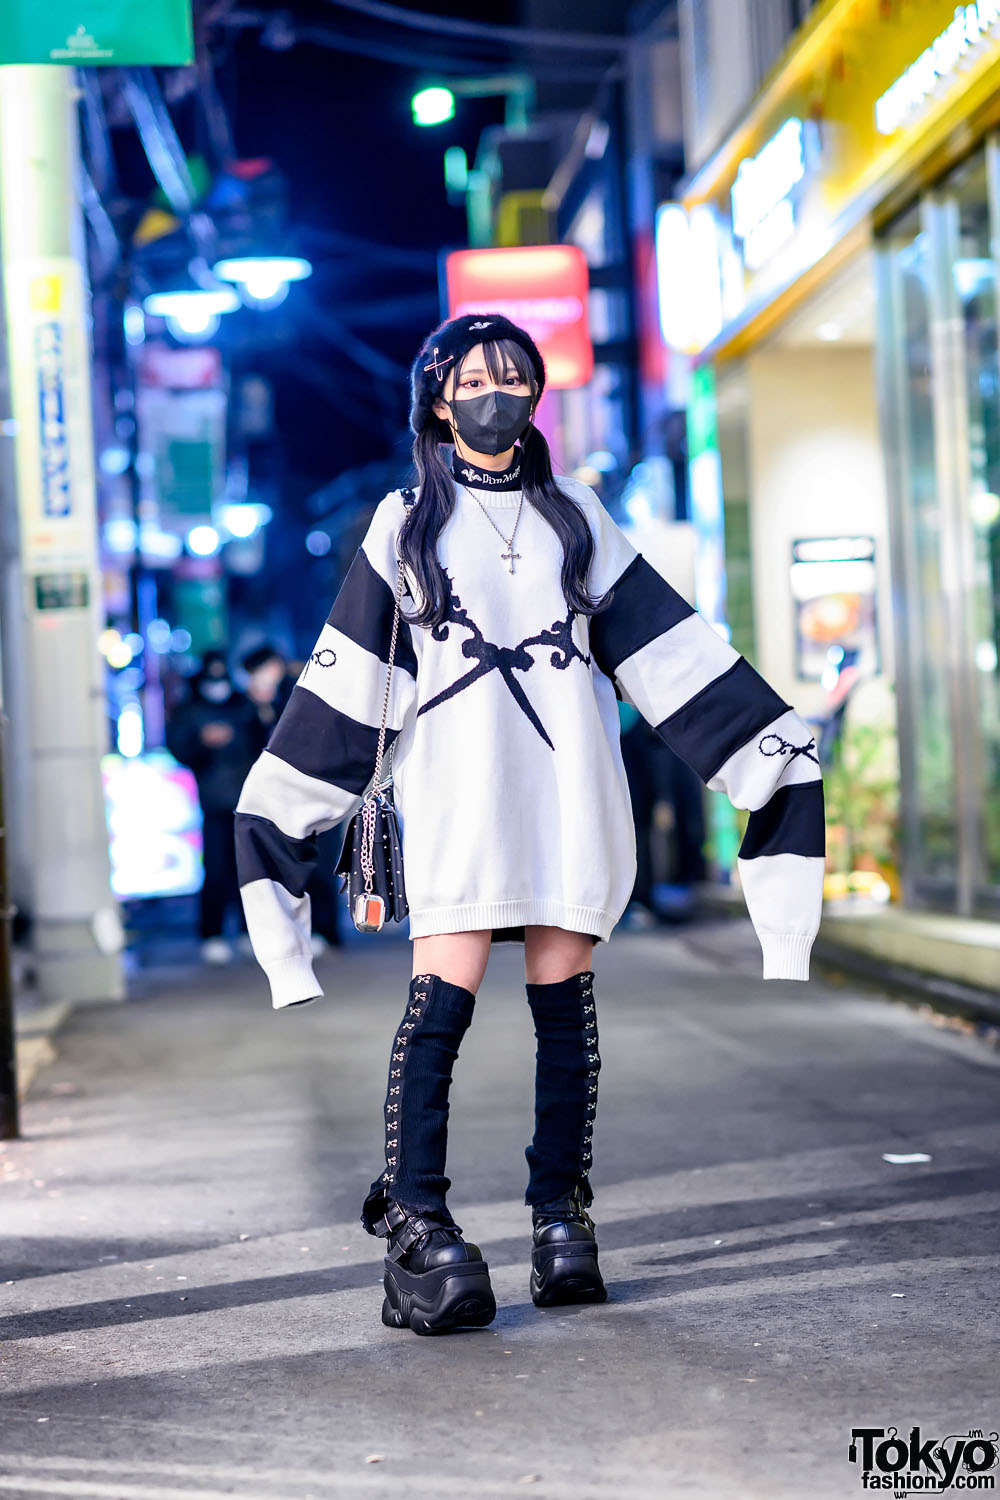 Japanese Fashion Designer in Harajuku w/ DimMoire Extra Long Sleeves Sweater, Alexander McQueen & Demonia Platform Boots